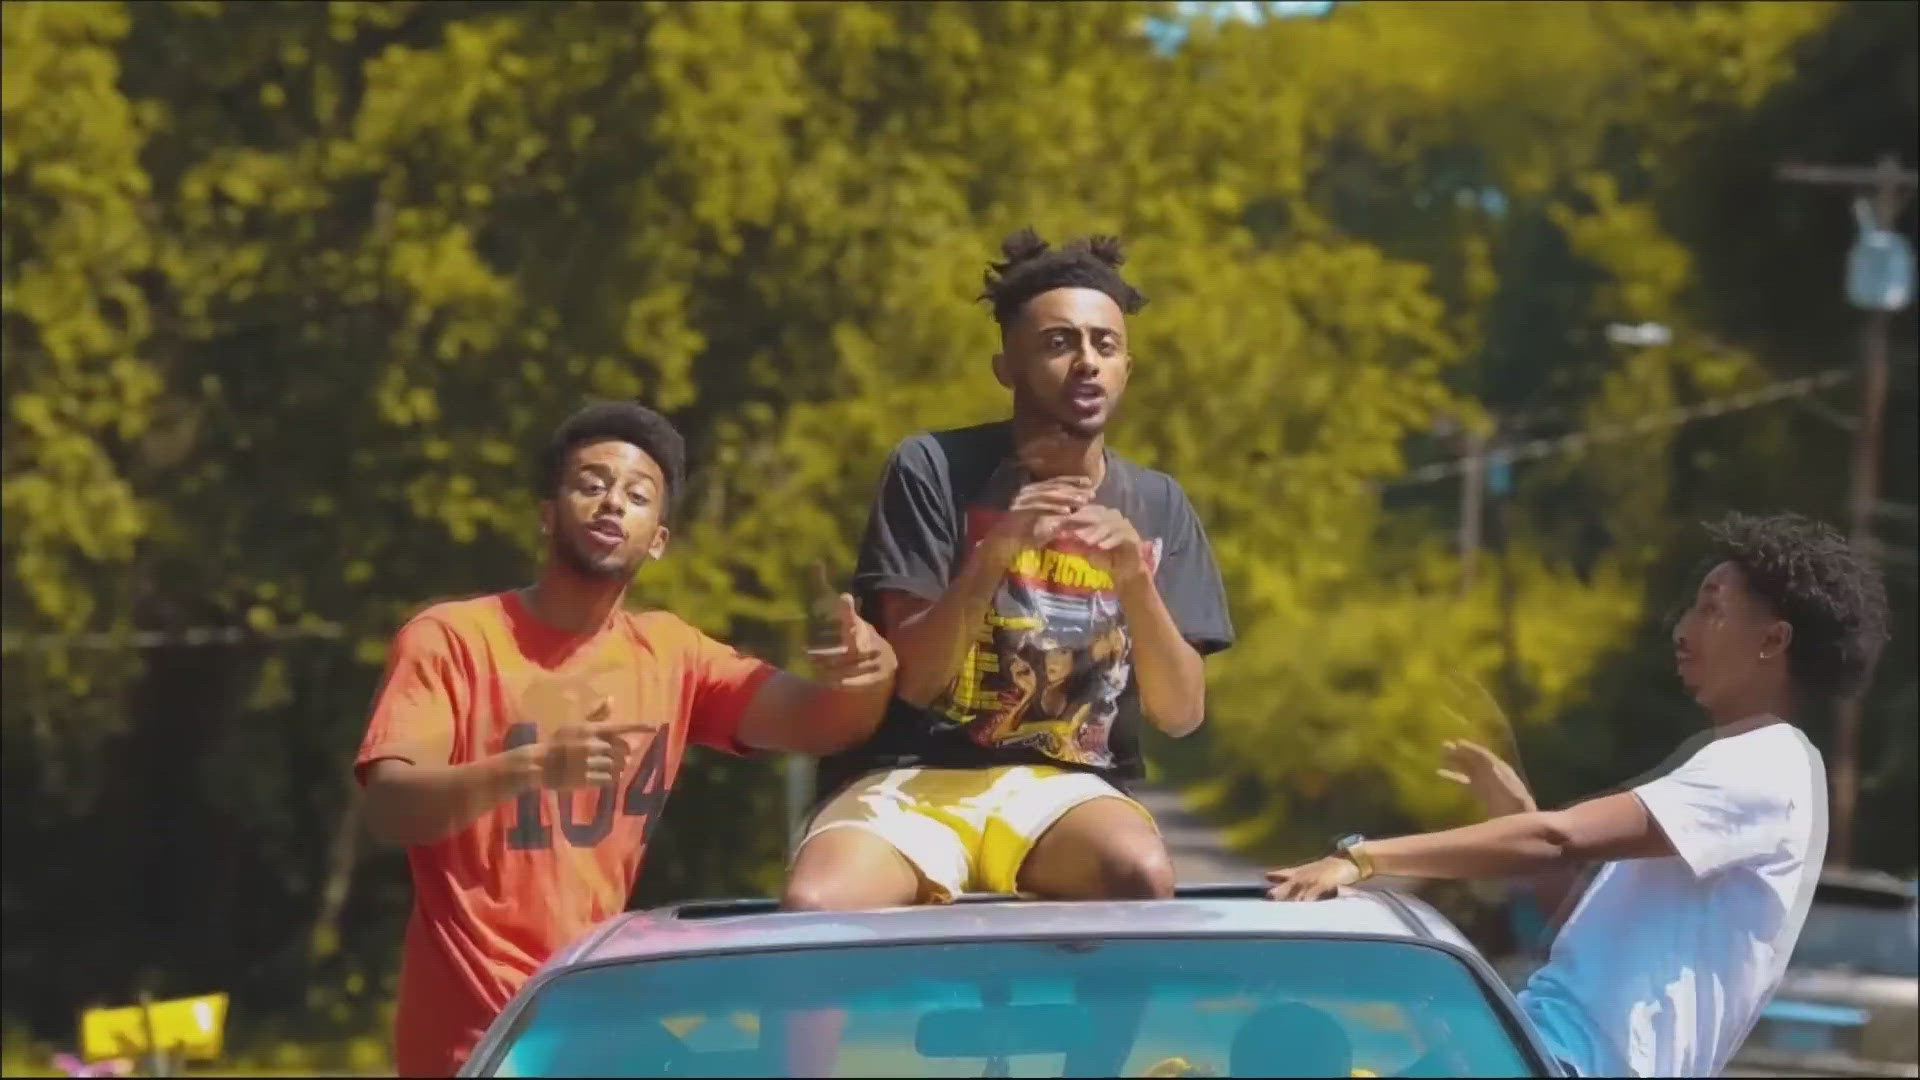 Aminé, a Portland rapper, teased his inaugural music festival in the Rose City "The Best Day Ever Fest" on social media over the weekend.